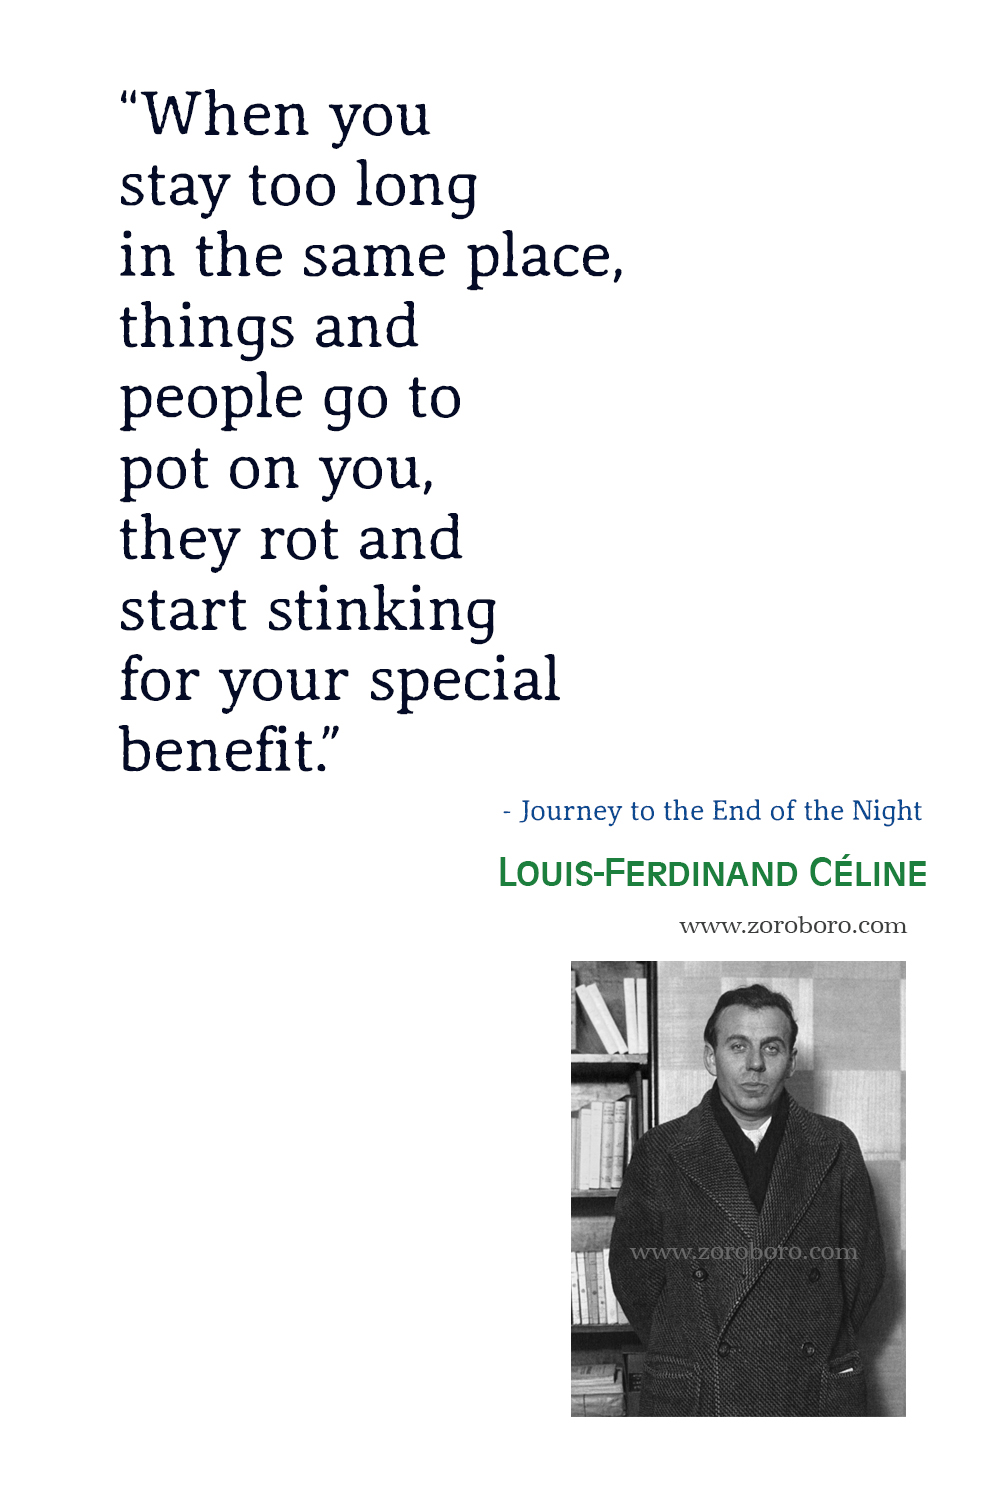 Louis-Ferdinand Celine Quotes, Louis-Ferdinand Celine Journey to the End of the Night Quotes, Louis-Ferdinand Céline Poems, Louis-Ferdinand Celine Poetry.